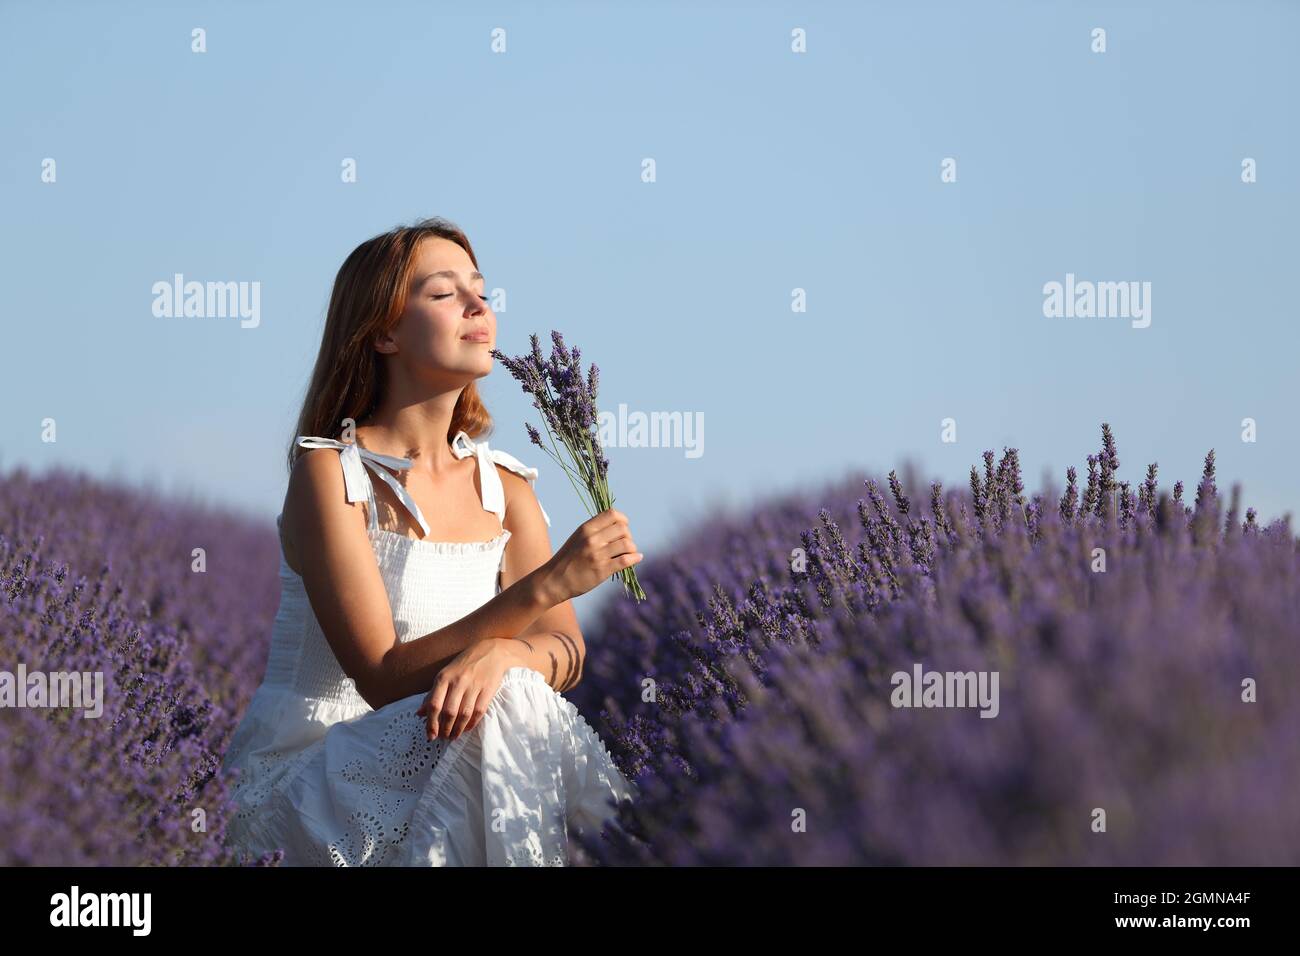 Happy woman wearing white dress smelling bouquet of lavender flowers in a field Stock Photo